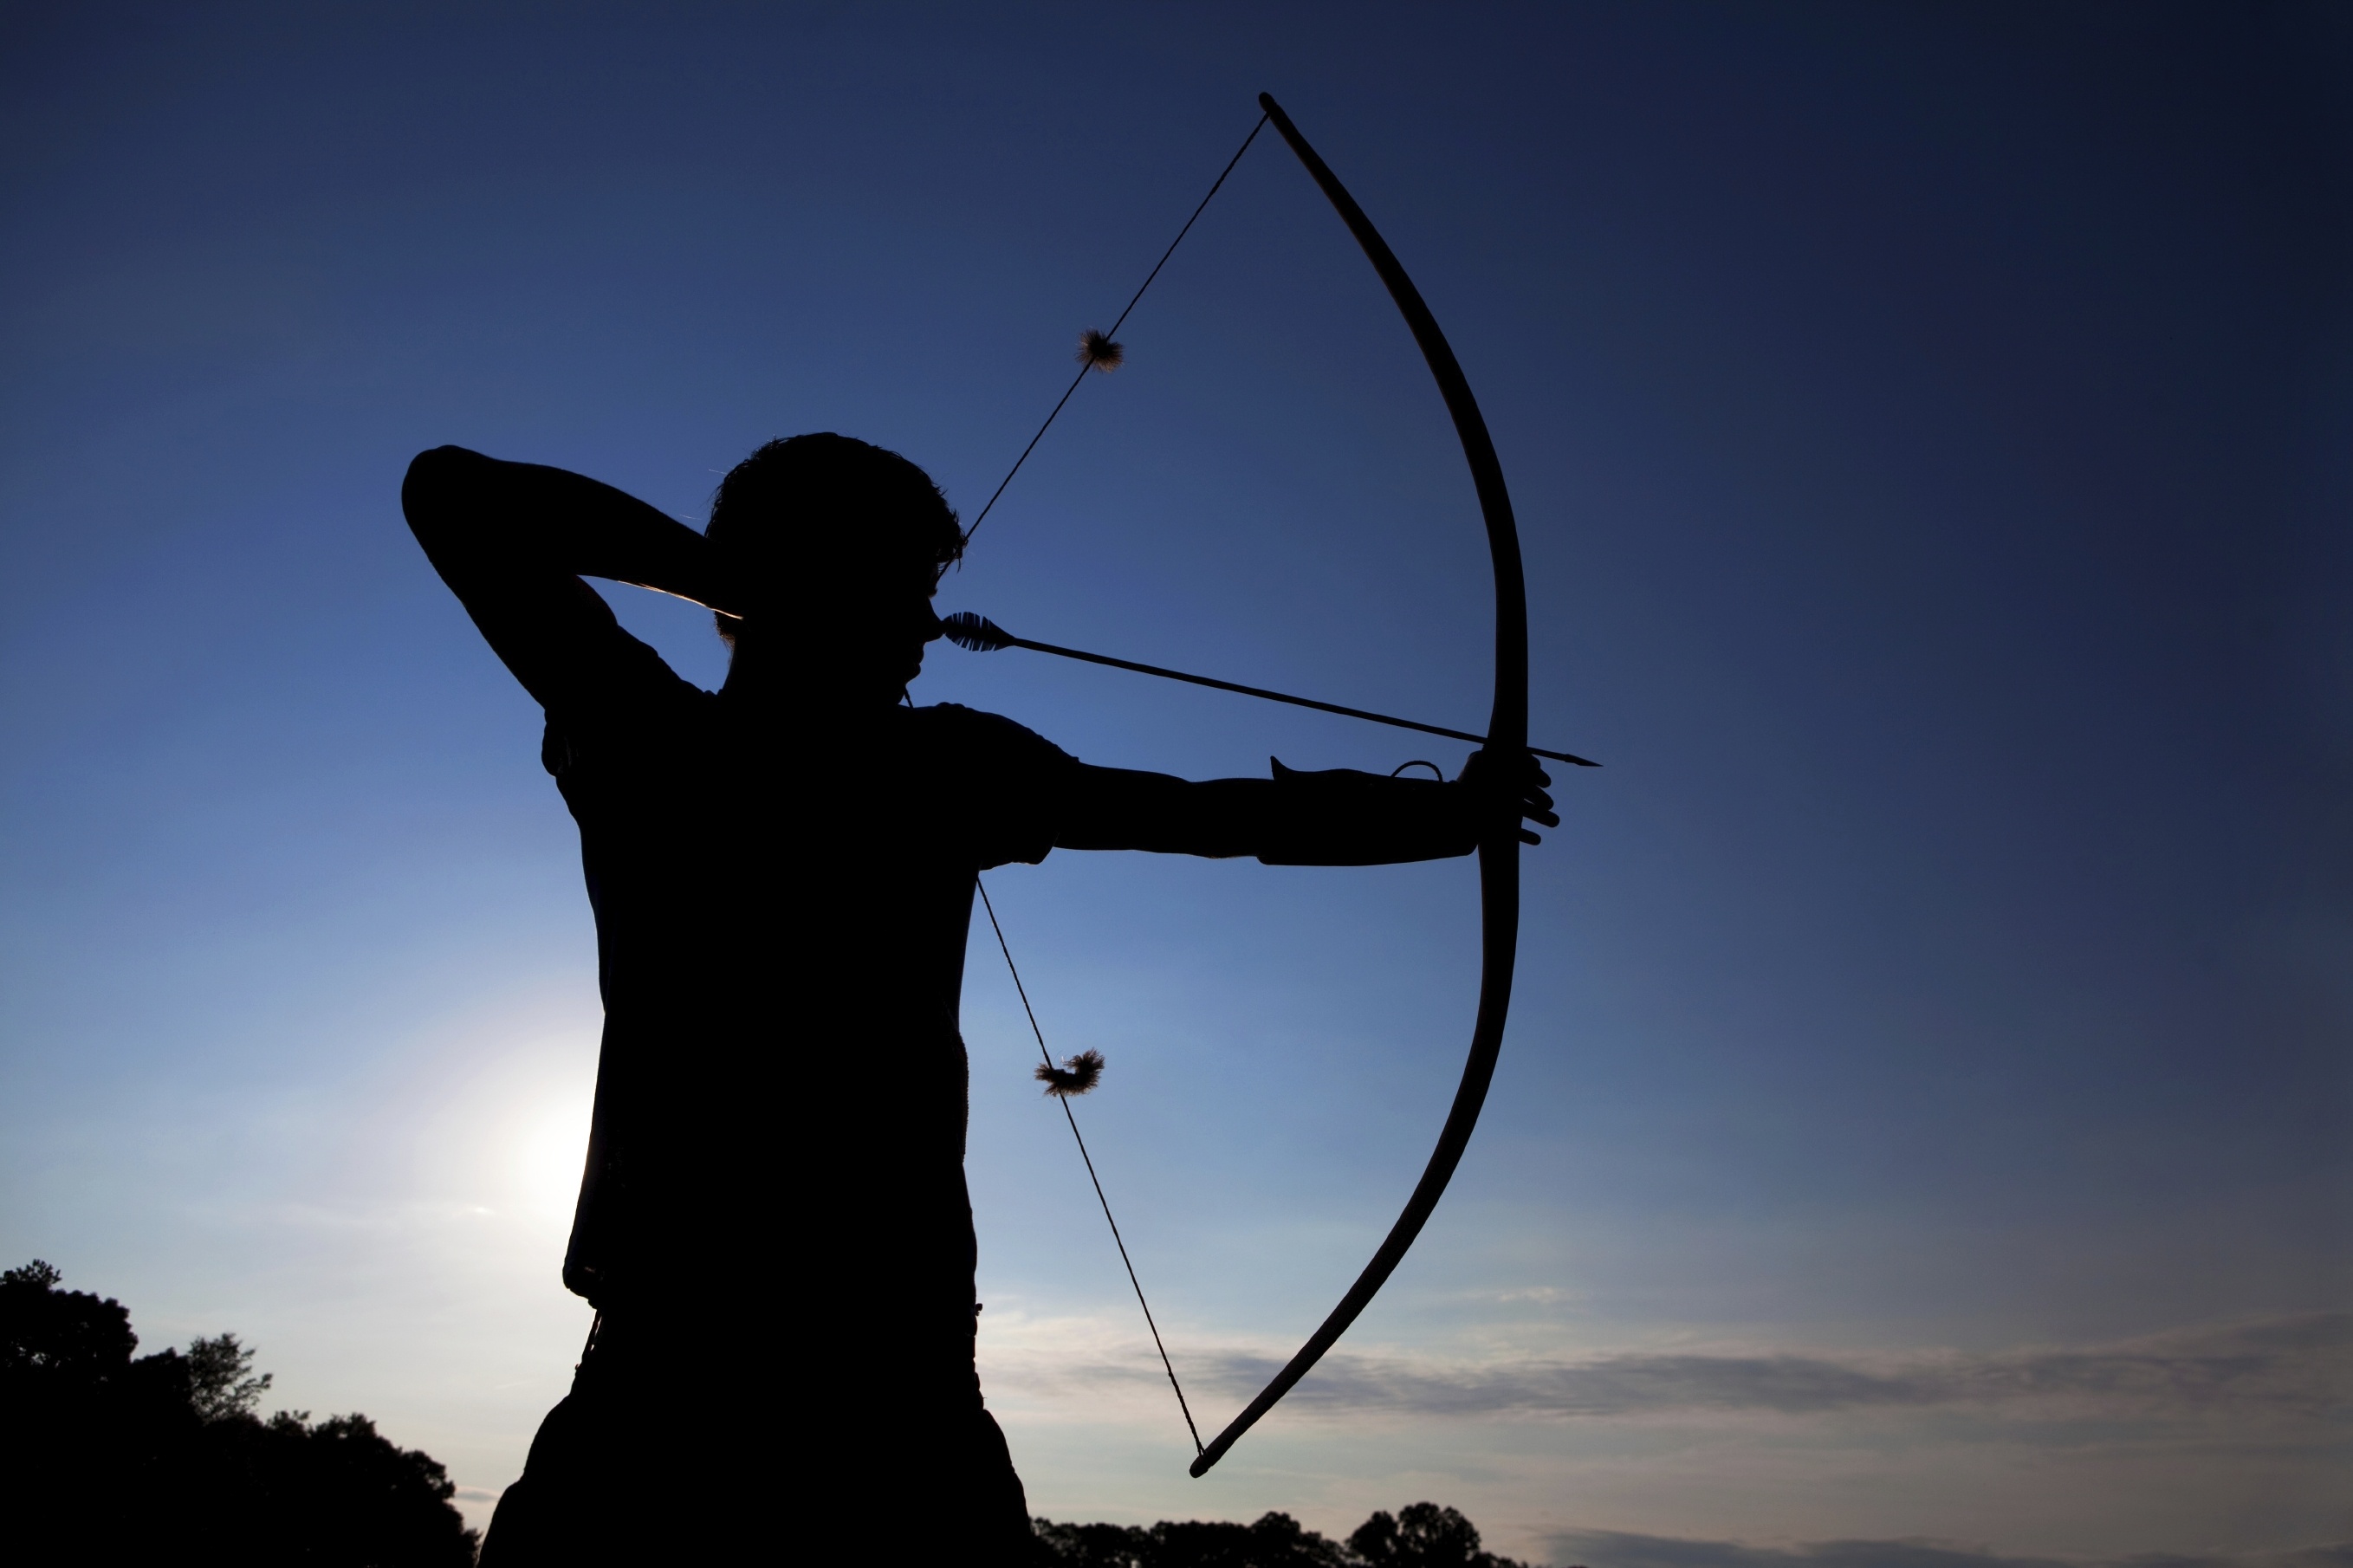 Archery: Bowman is ready to shoot, Competitive sport. 2720x1810 HD Wallpaper.